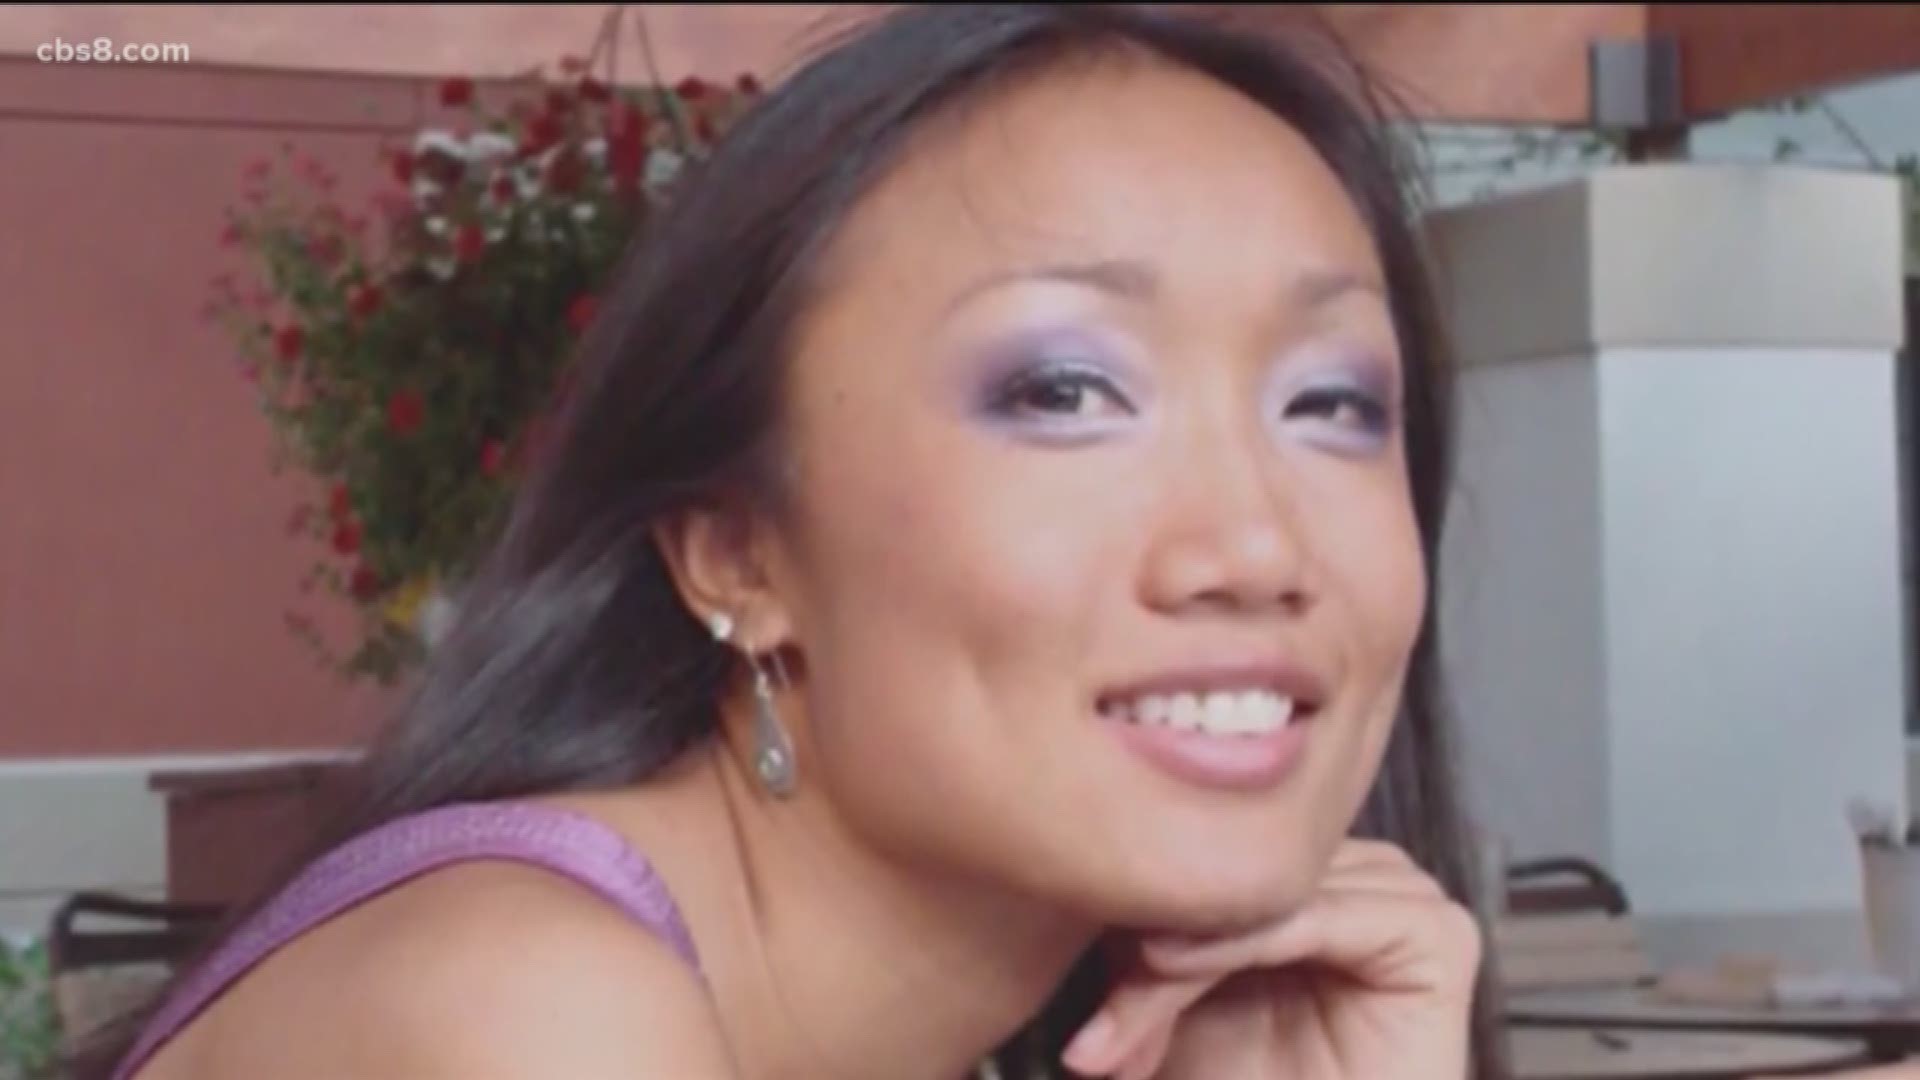 The case has captivated many in and out of San Diego since Rebecca Zahau was found dead at the Coronado Spreckels Mansion in 2011.